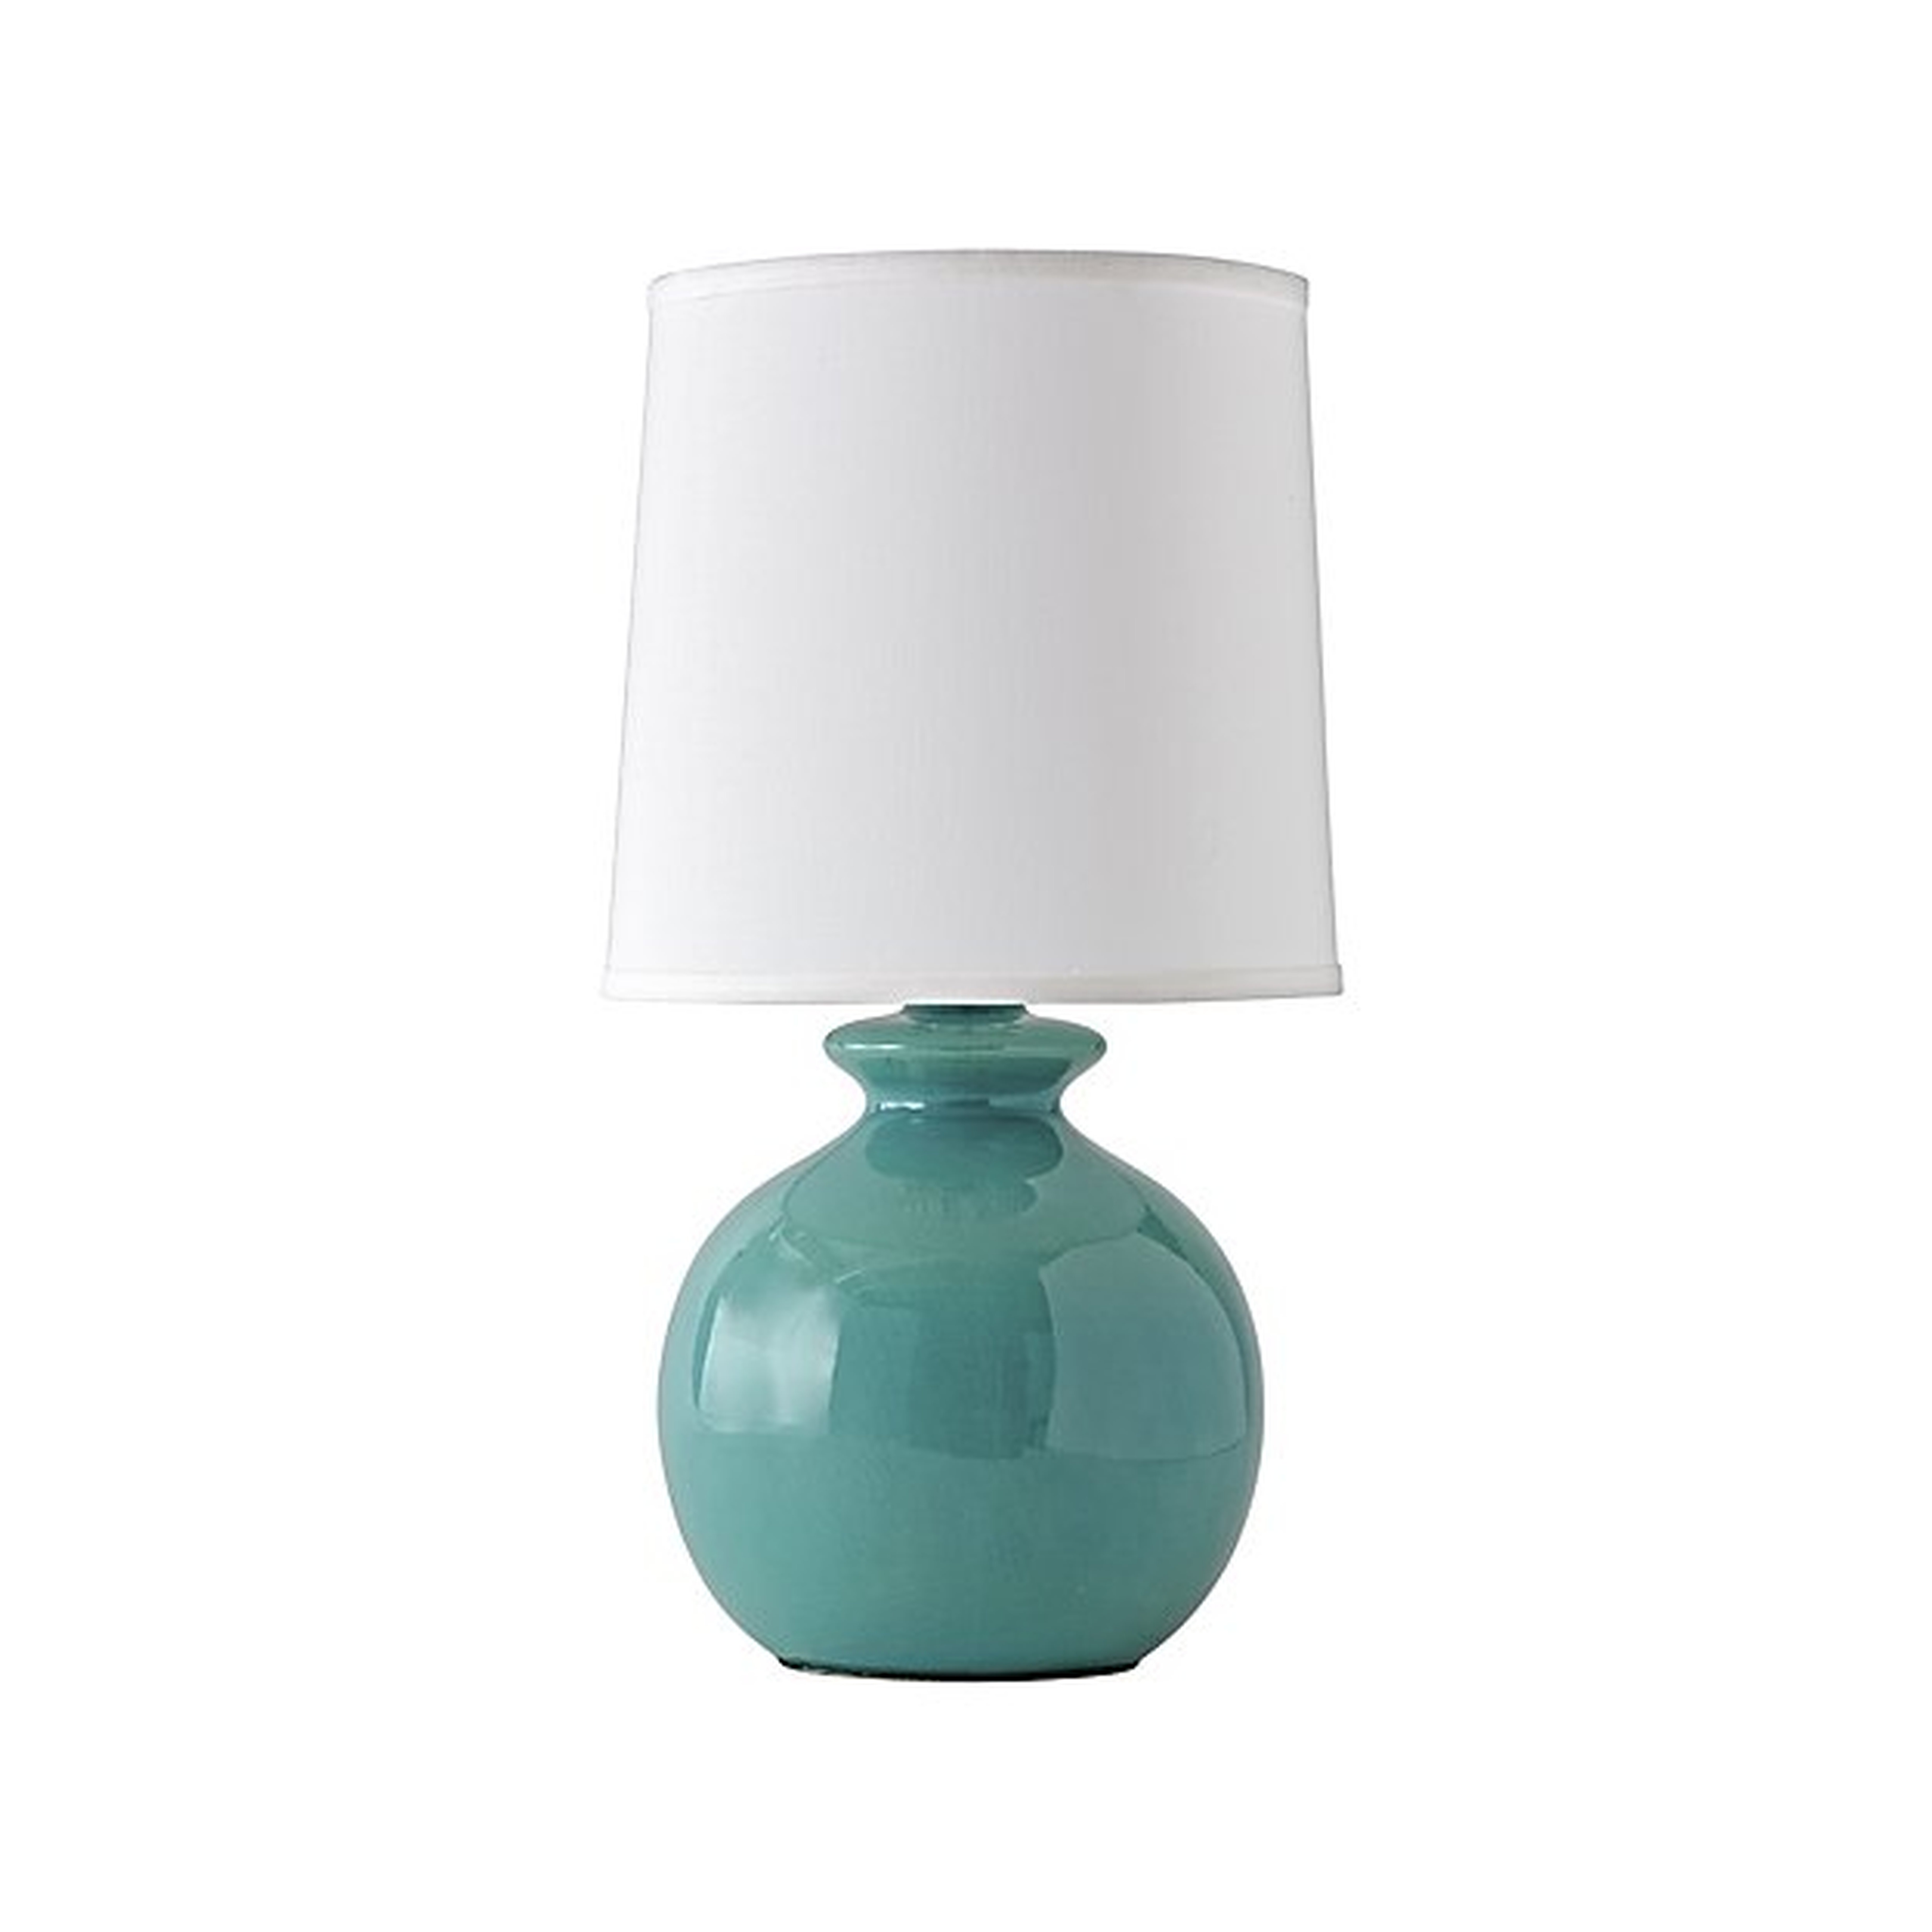 Gumball Teal Table Lamp - Crate and Barrel